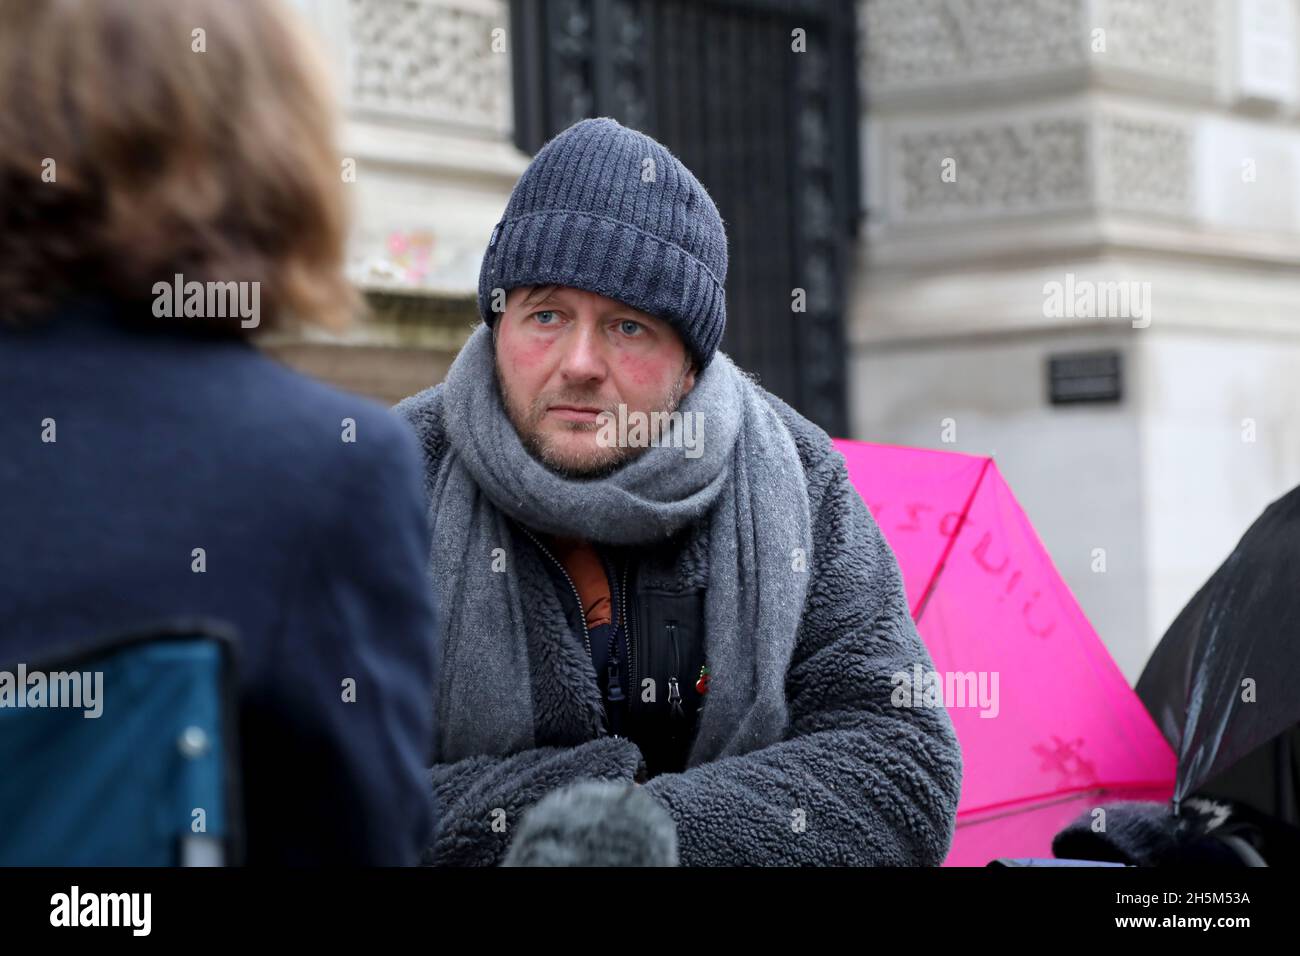 London, UK, 10 November 2021: Richard Ratcliffe gives a media interview on day 18 of a hunger strike at the UK Foreign Office Stock Photo